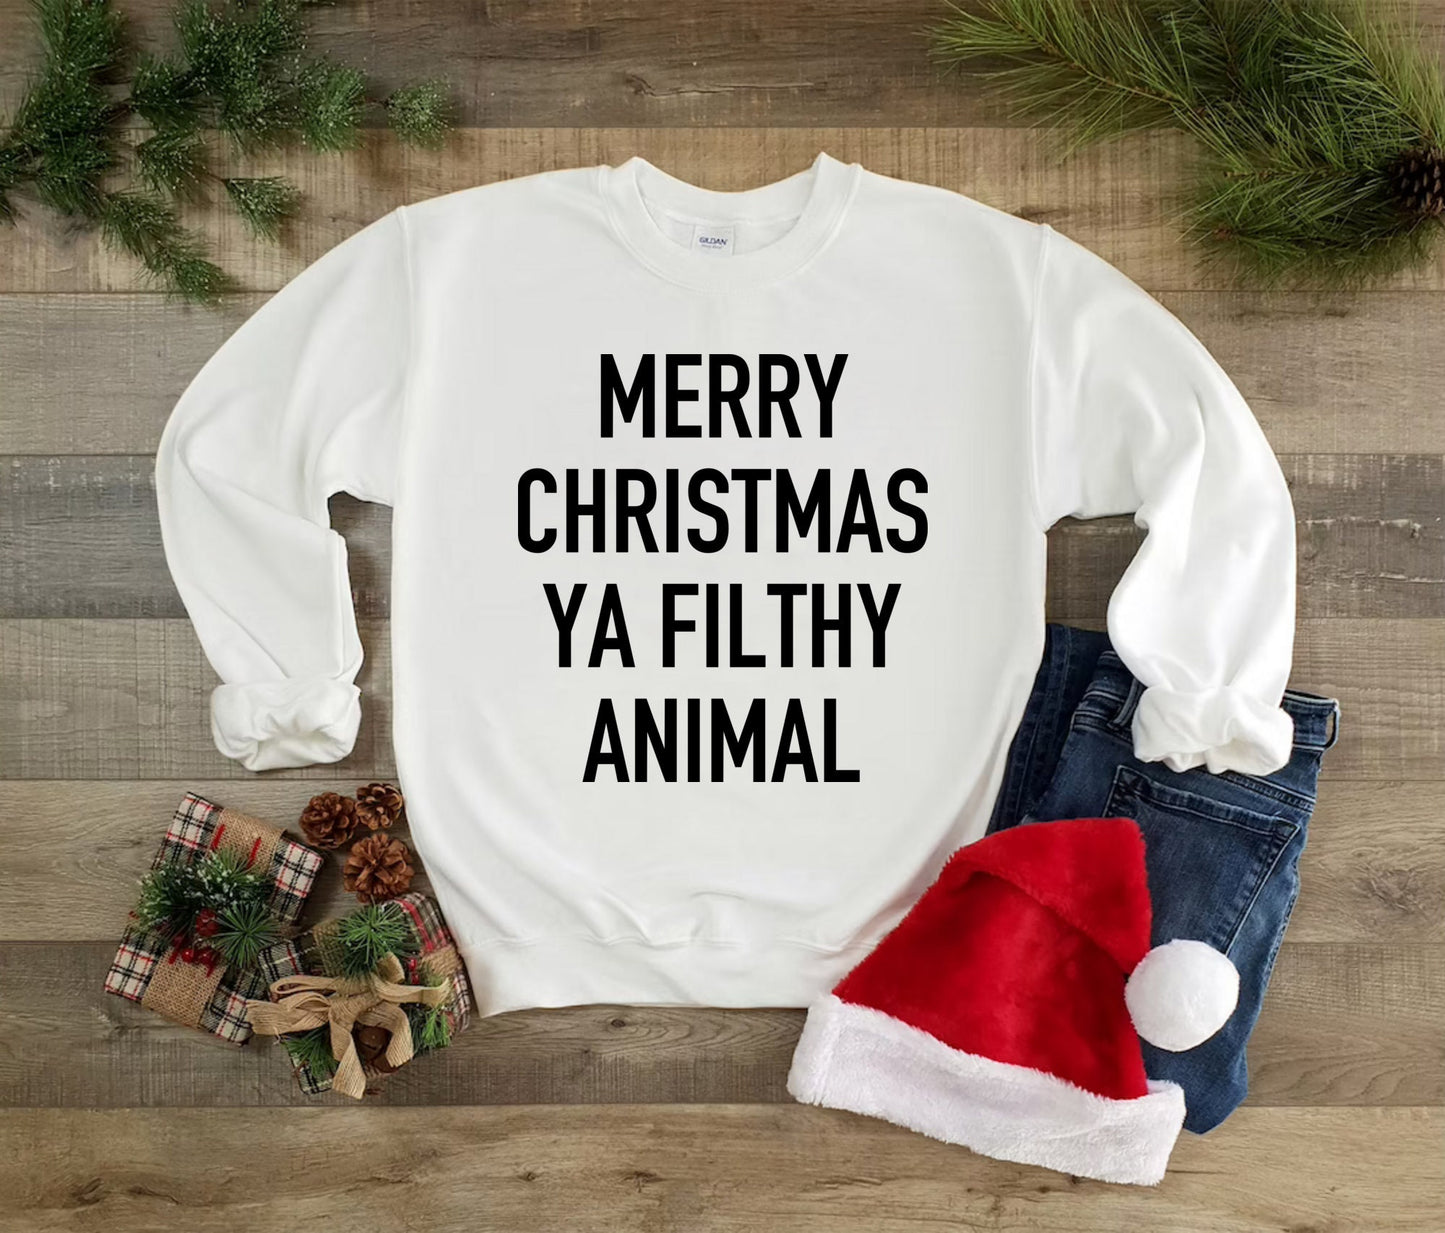 Unisex Funny Christmas Sweatshirt, Home Movie Quote Merry Christmas Ya Filthy Animal Holiday Alone Party Graphic Sweatshirt